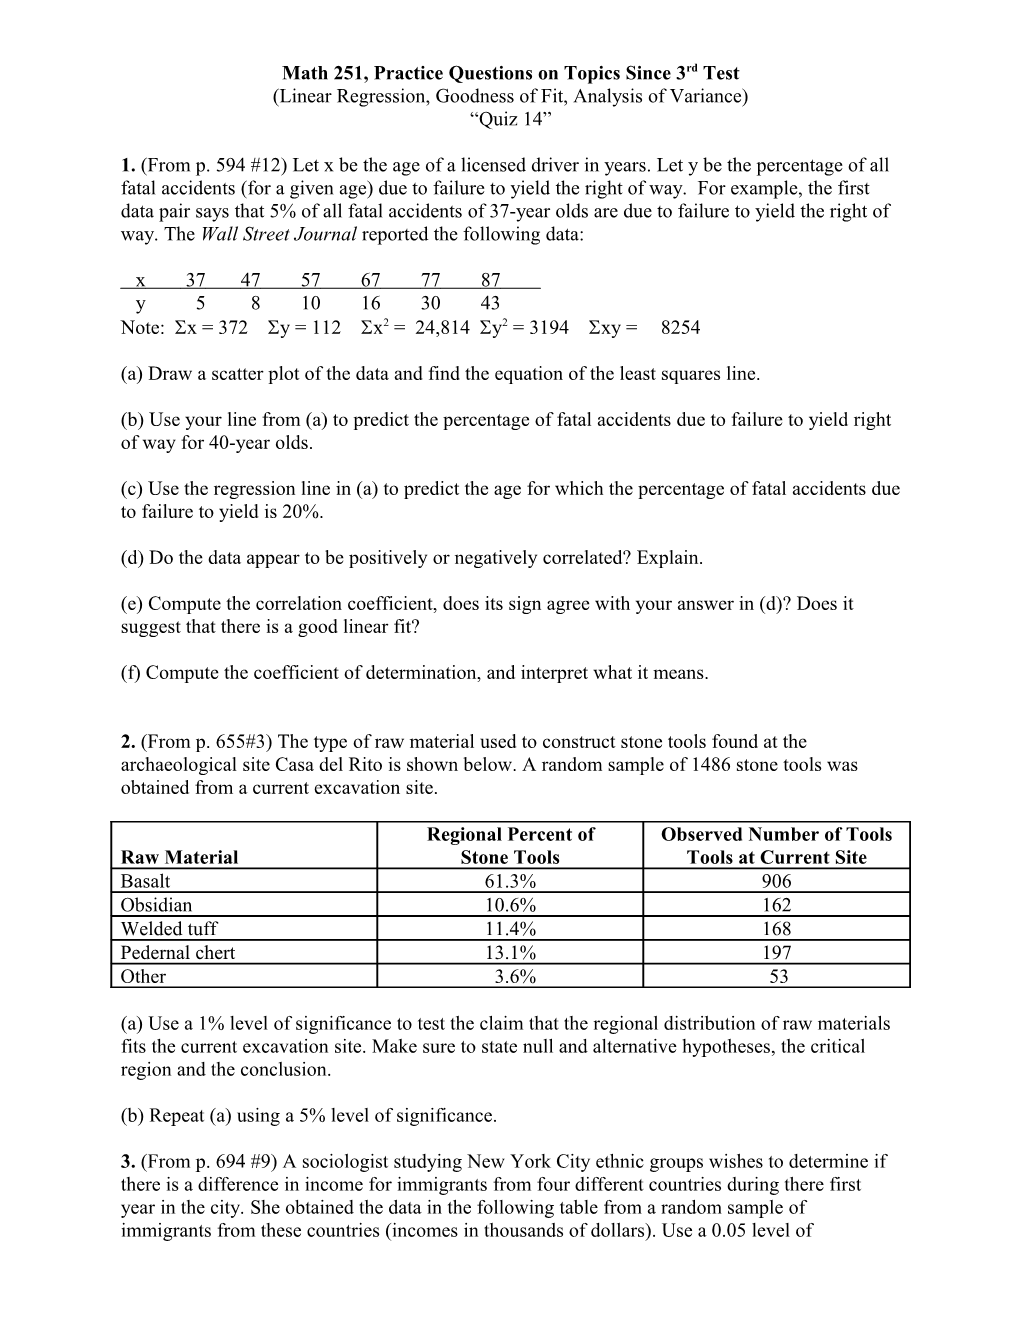 Math 251, Review for Final, Spring 2002